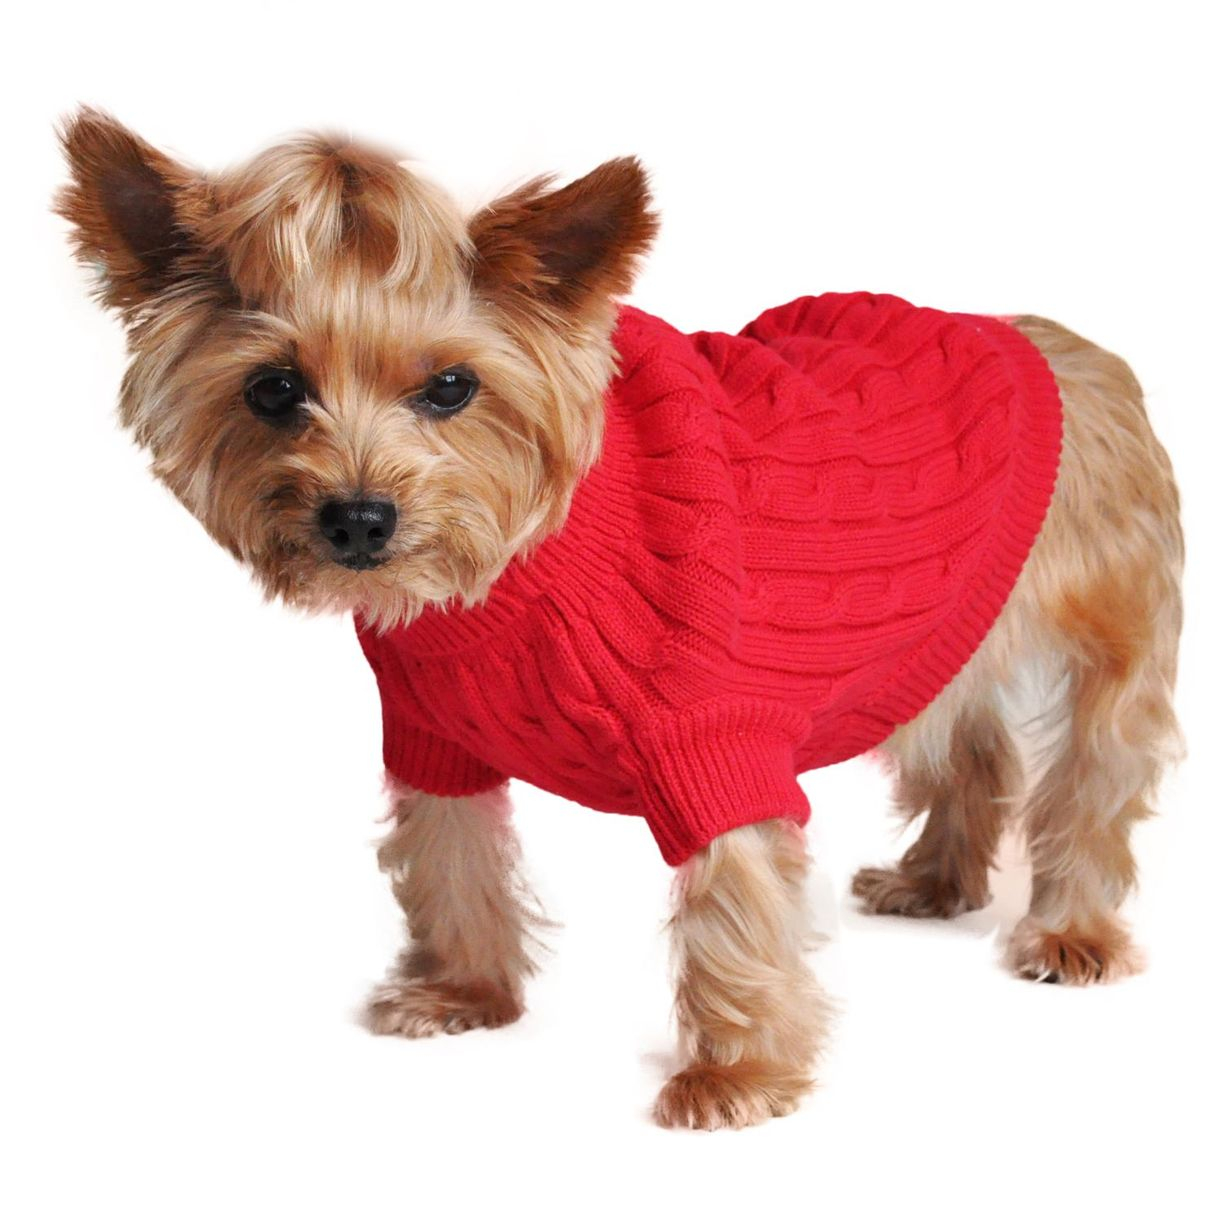 Knitted Dog Coat Pattern Cotton Cable Knit Dog Sweater Pattern Free Hypoallergenic Dog Sweater